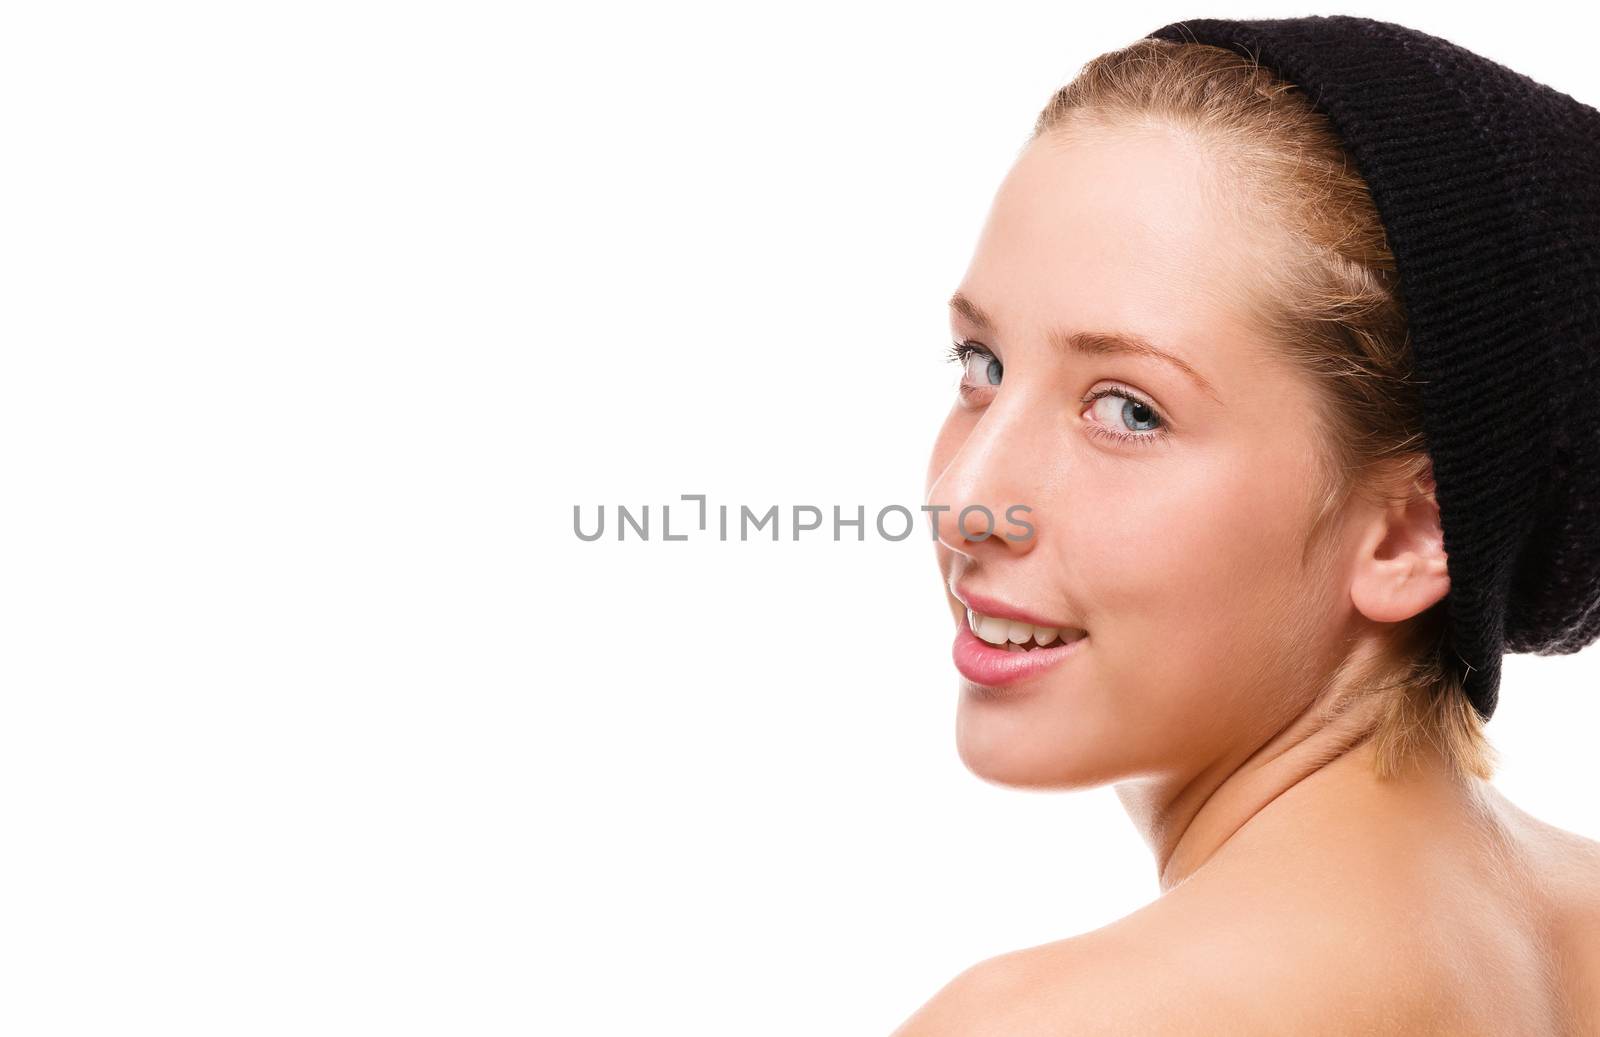 smiling young woman wearing a black cap looking over her naked s by RobStark